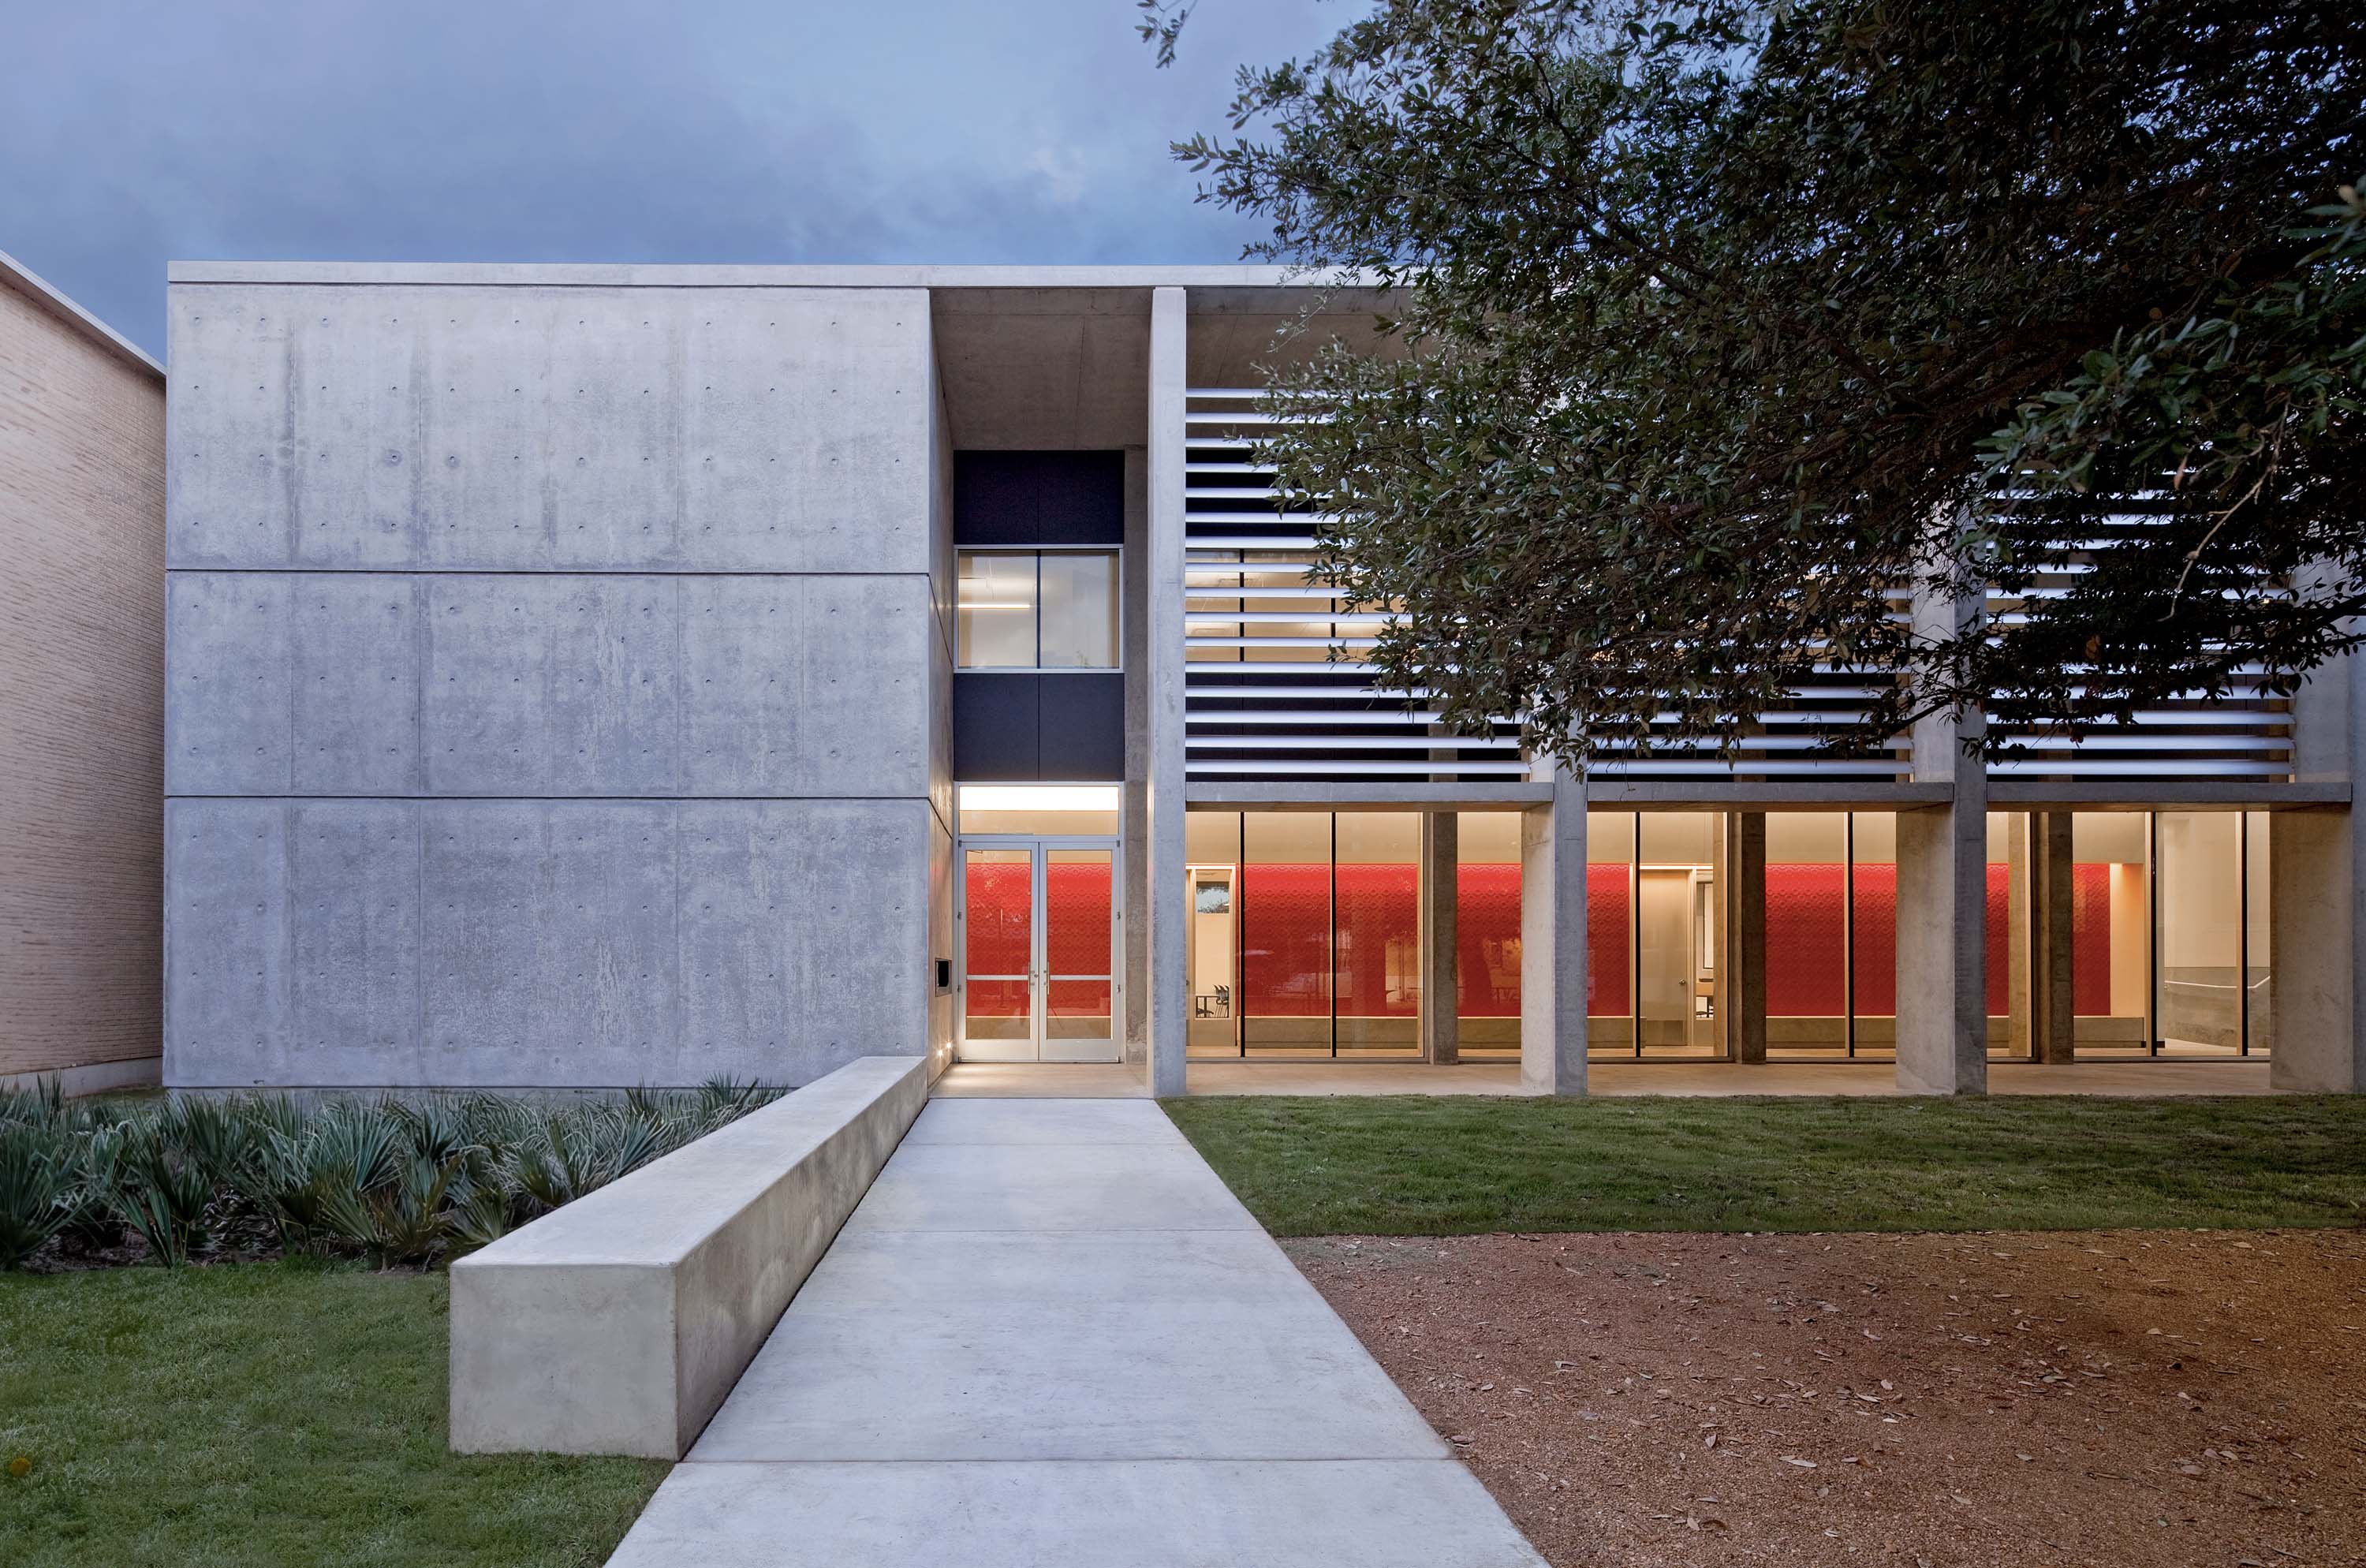 Entryway exterior shot of Doyle Hall by Specht Novak Architects, showcase the exposed concrete and horizontal slats over the windows. Shot by Taggart Sorensen.